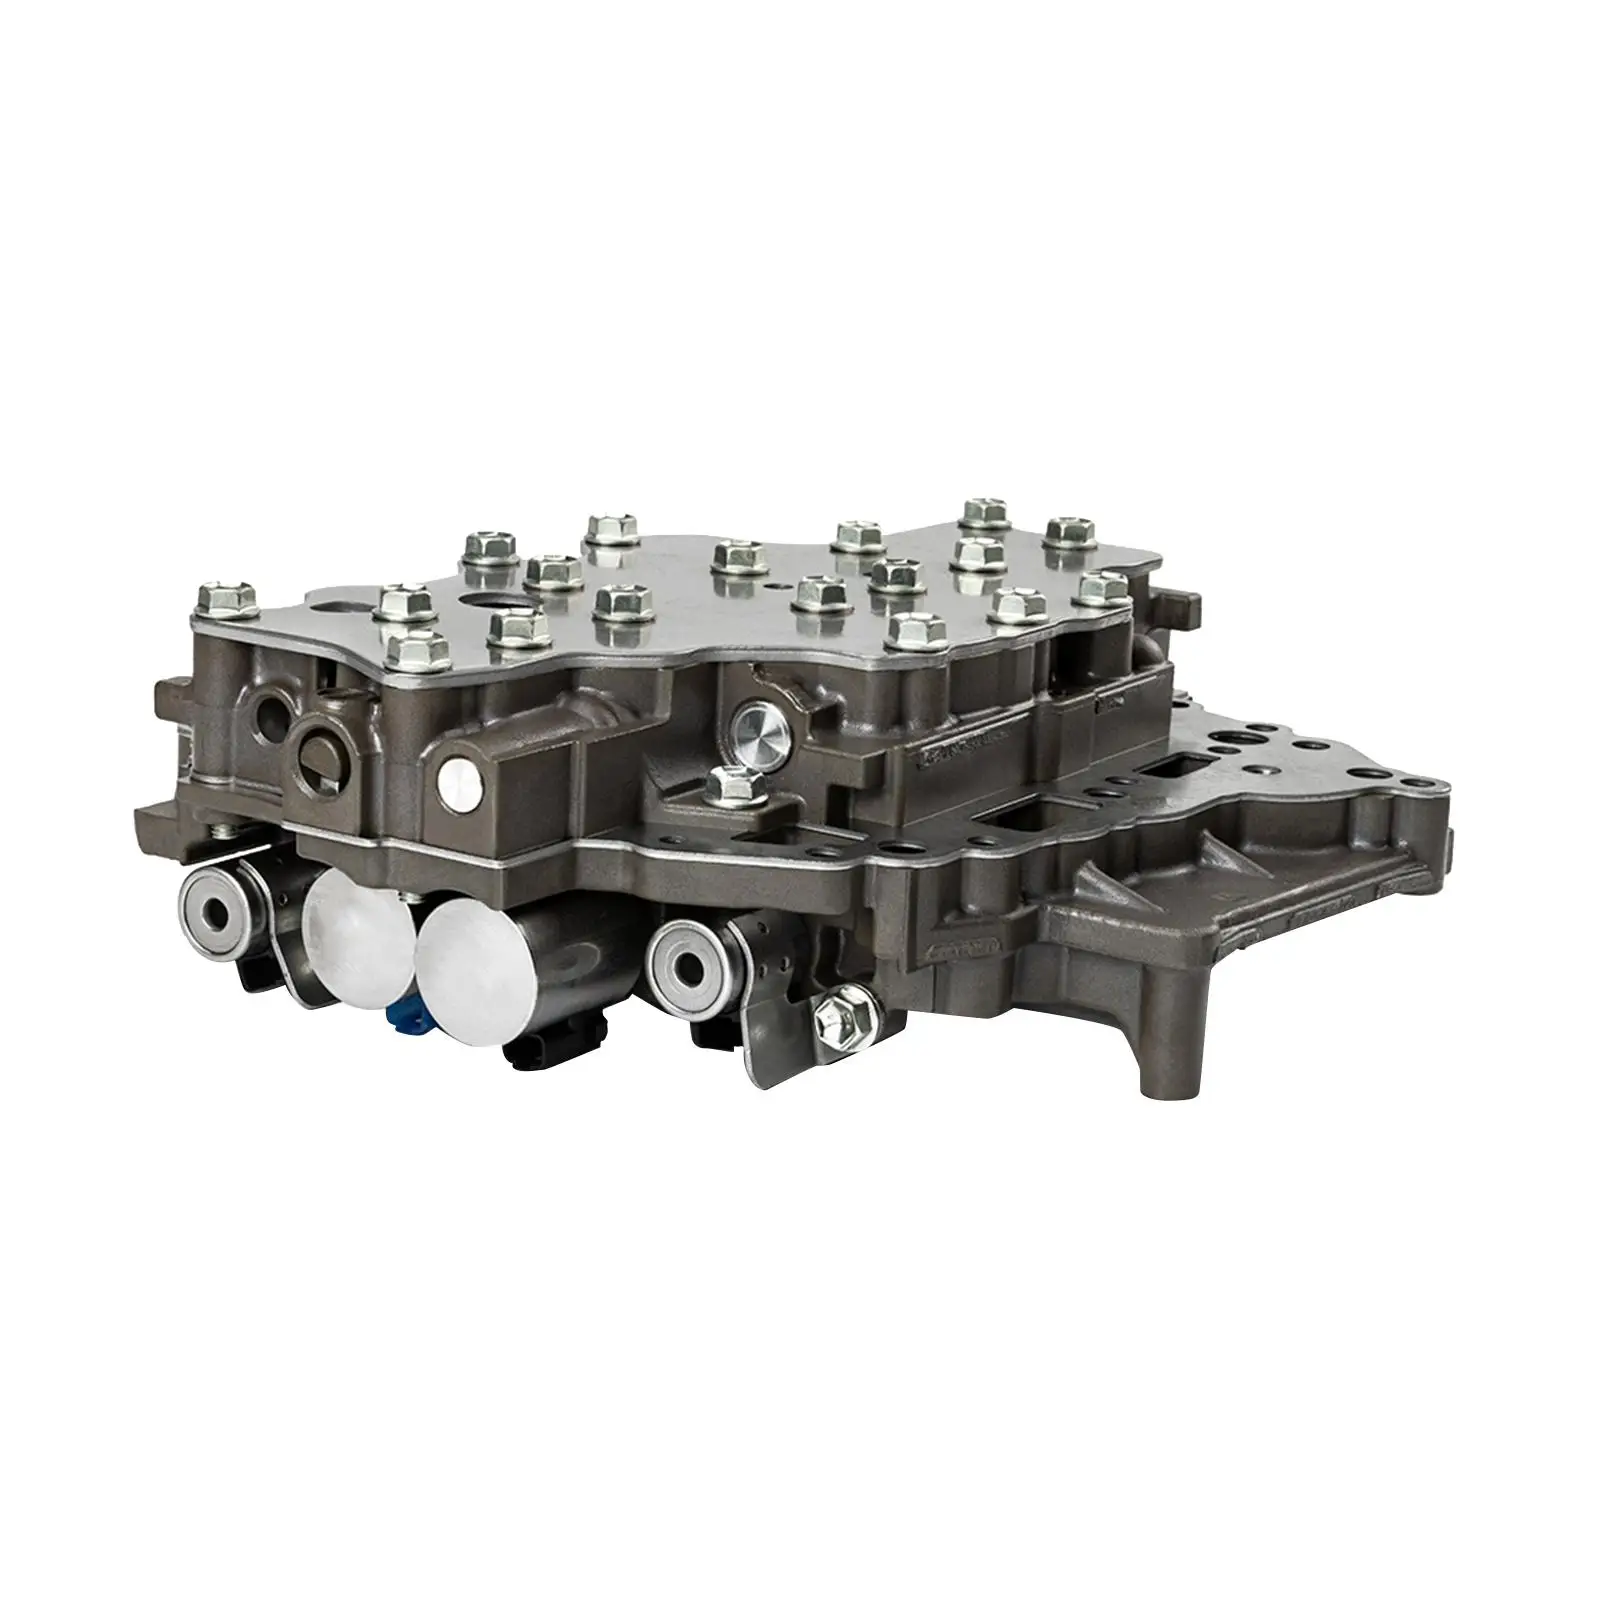 Gearbox Transmission Valve Body embly Accessories K313 K310 for  Corolla1.6L 1.8 - £511.69 GBP